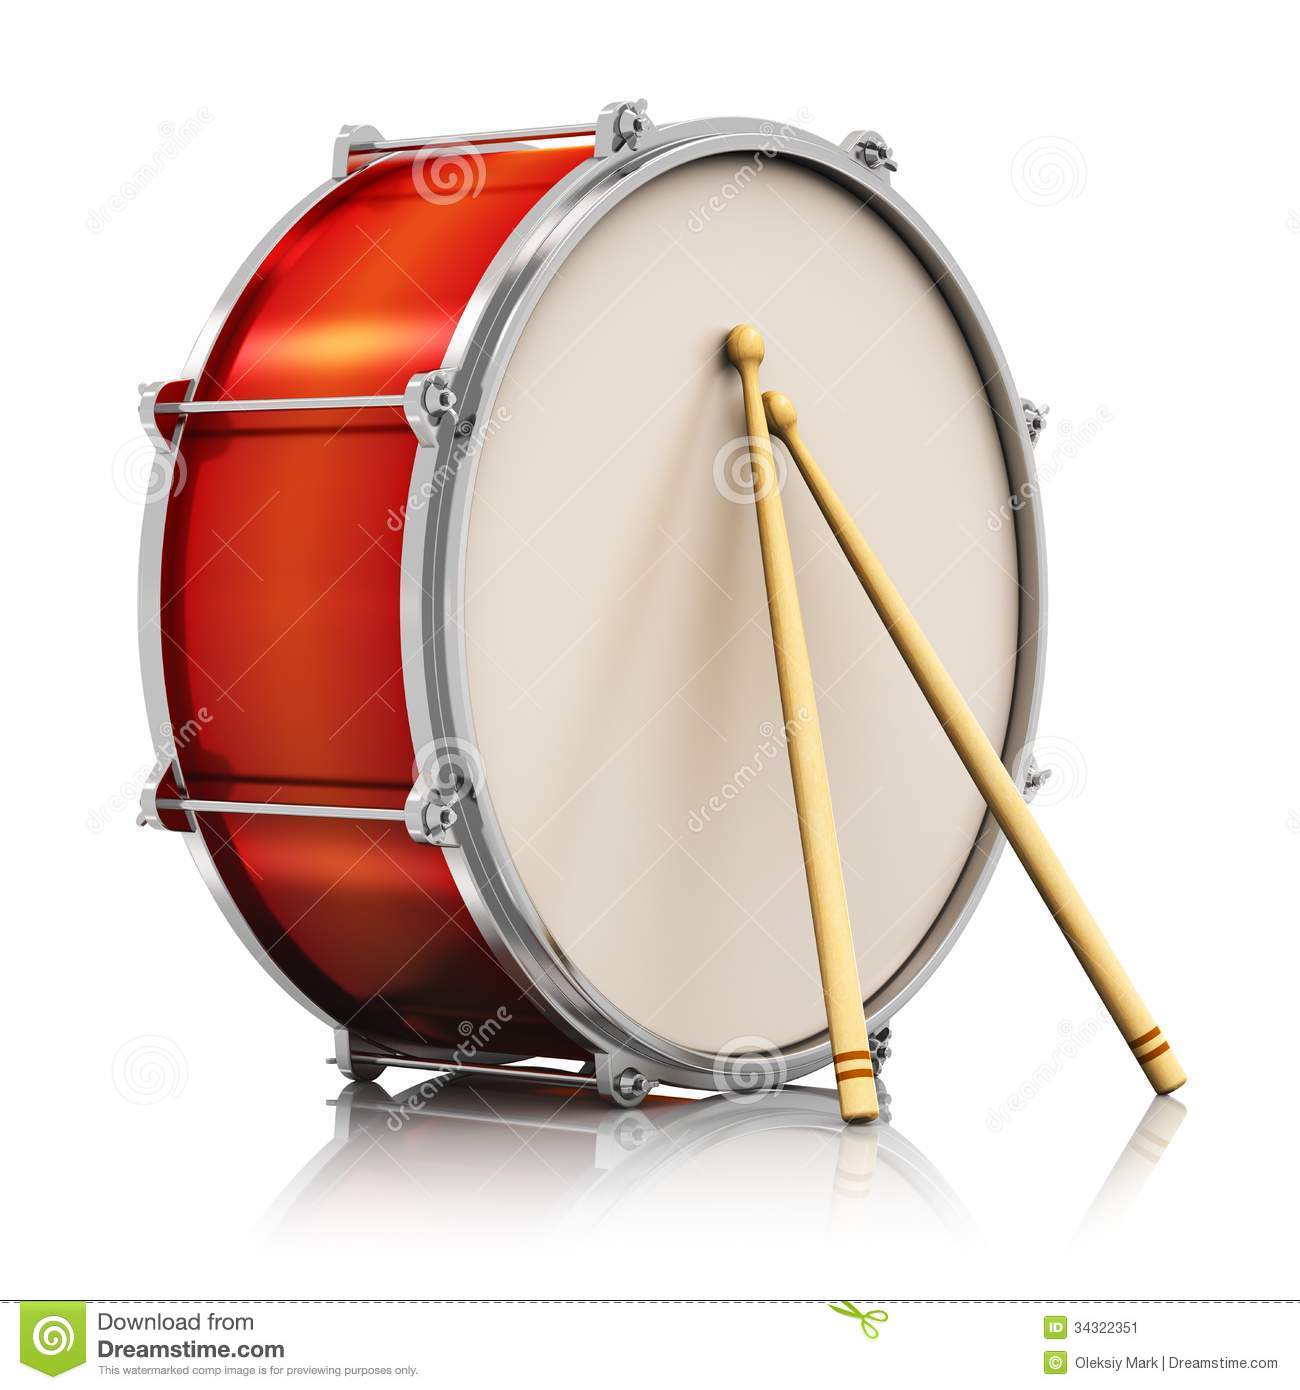 Red Drum With Drumsticks Stock Image   Image  34322351